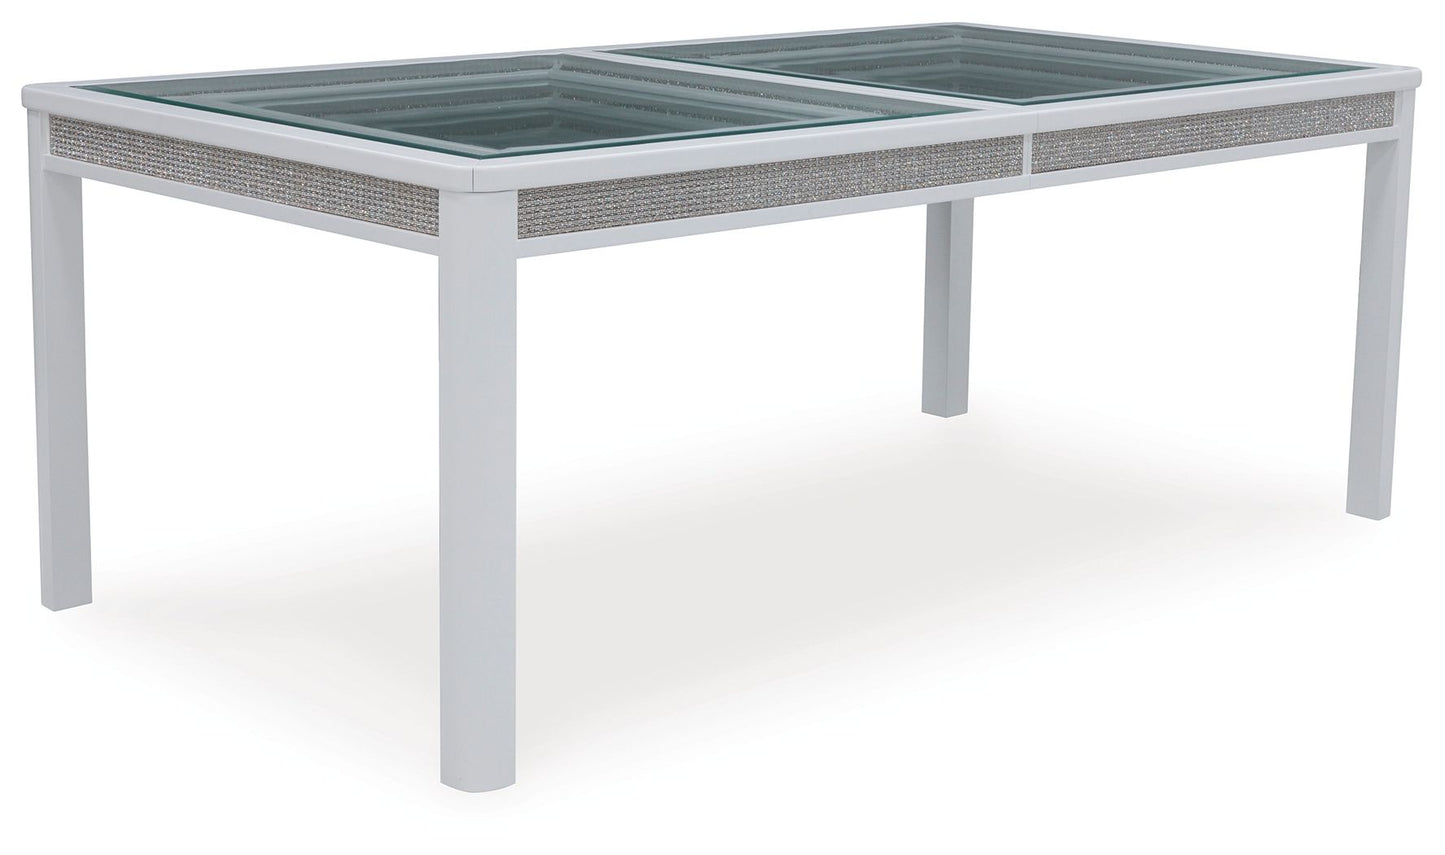 Chalanna - White - Rectangular Dining Room Extension Table